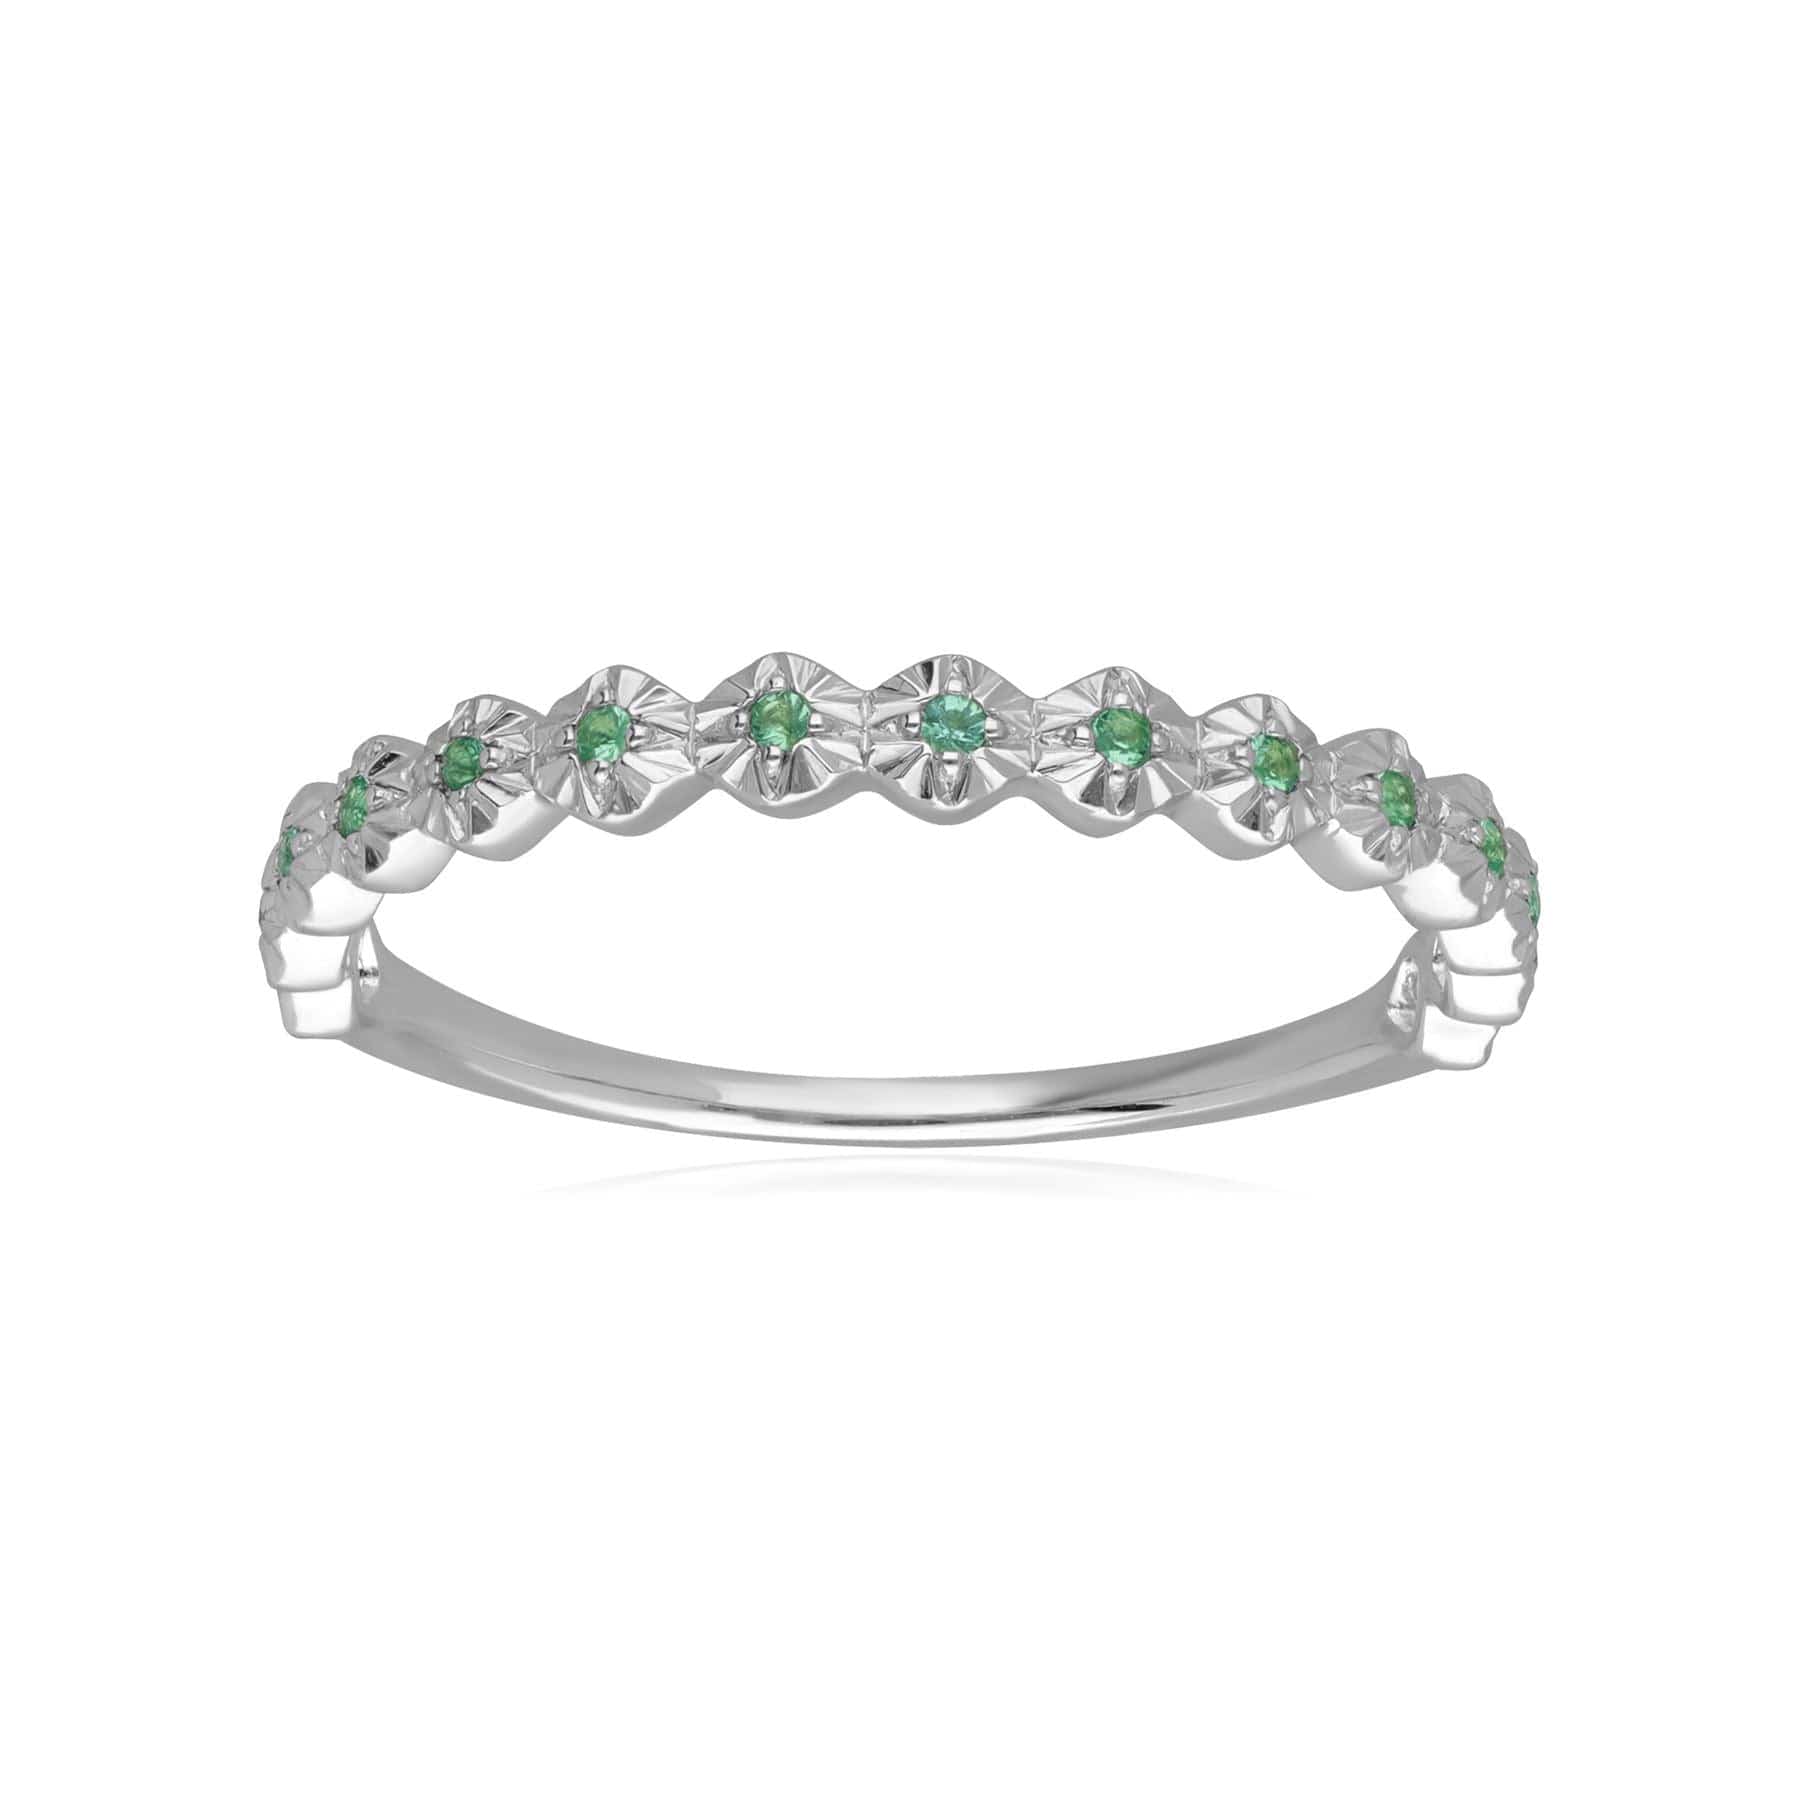 162R0405039 Half Eternity 9ct White Gold 0.045ct Emerald Band Ring 4